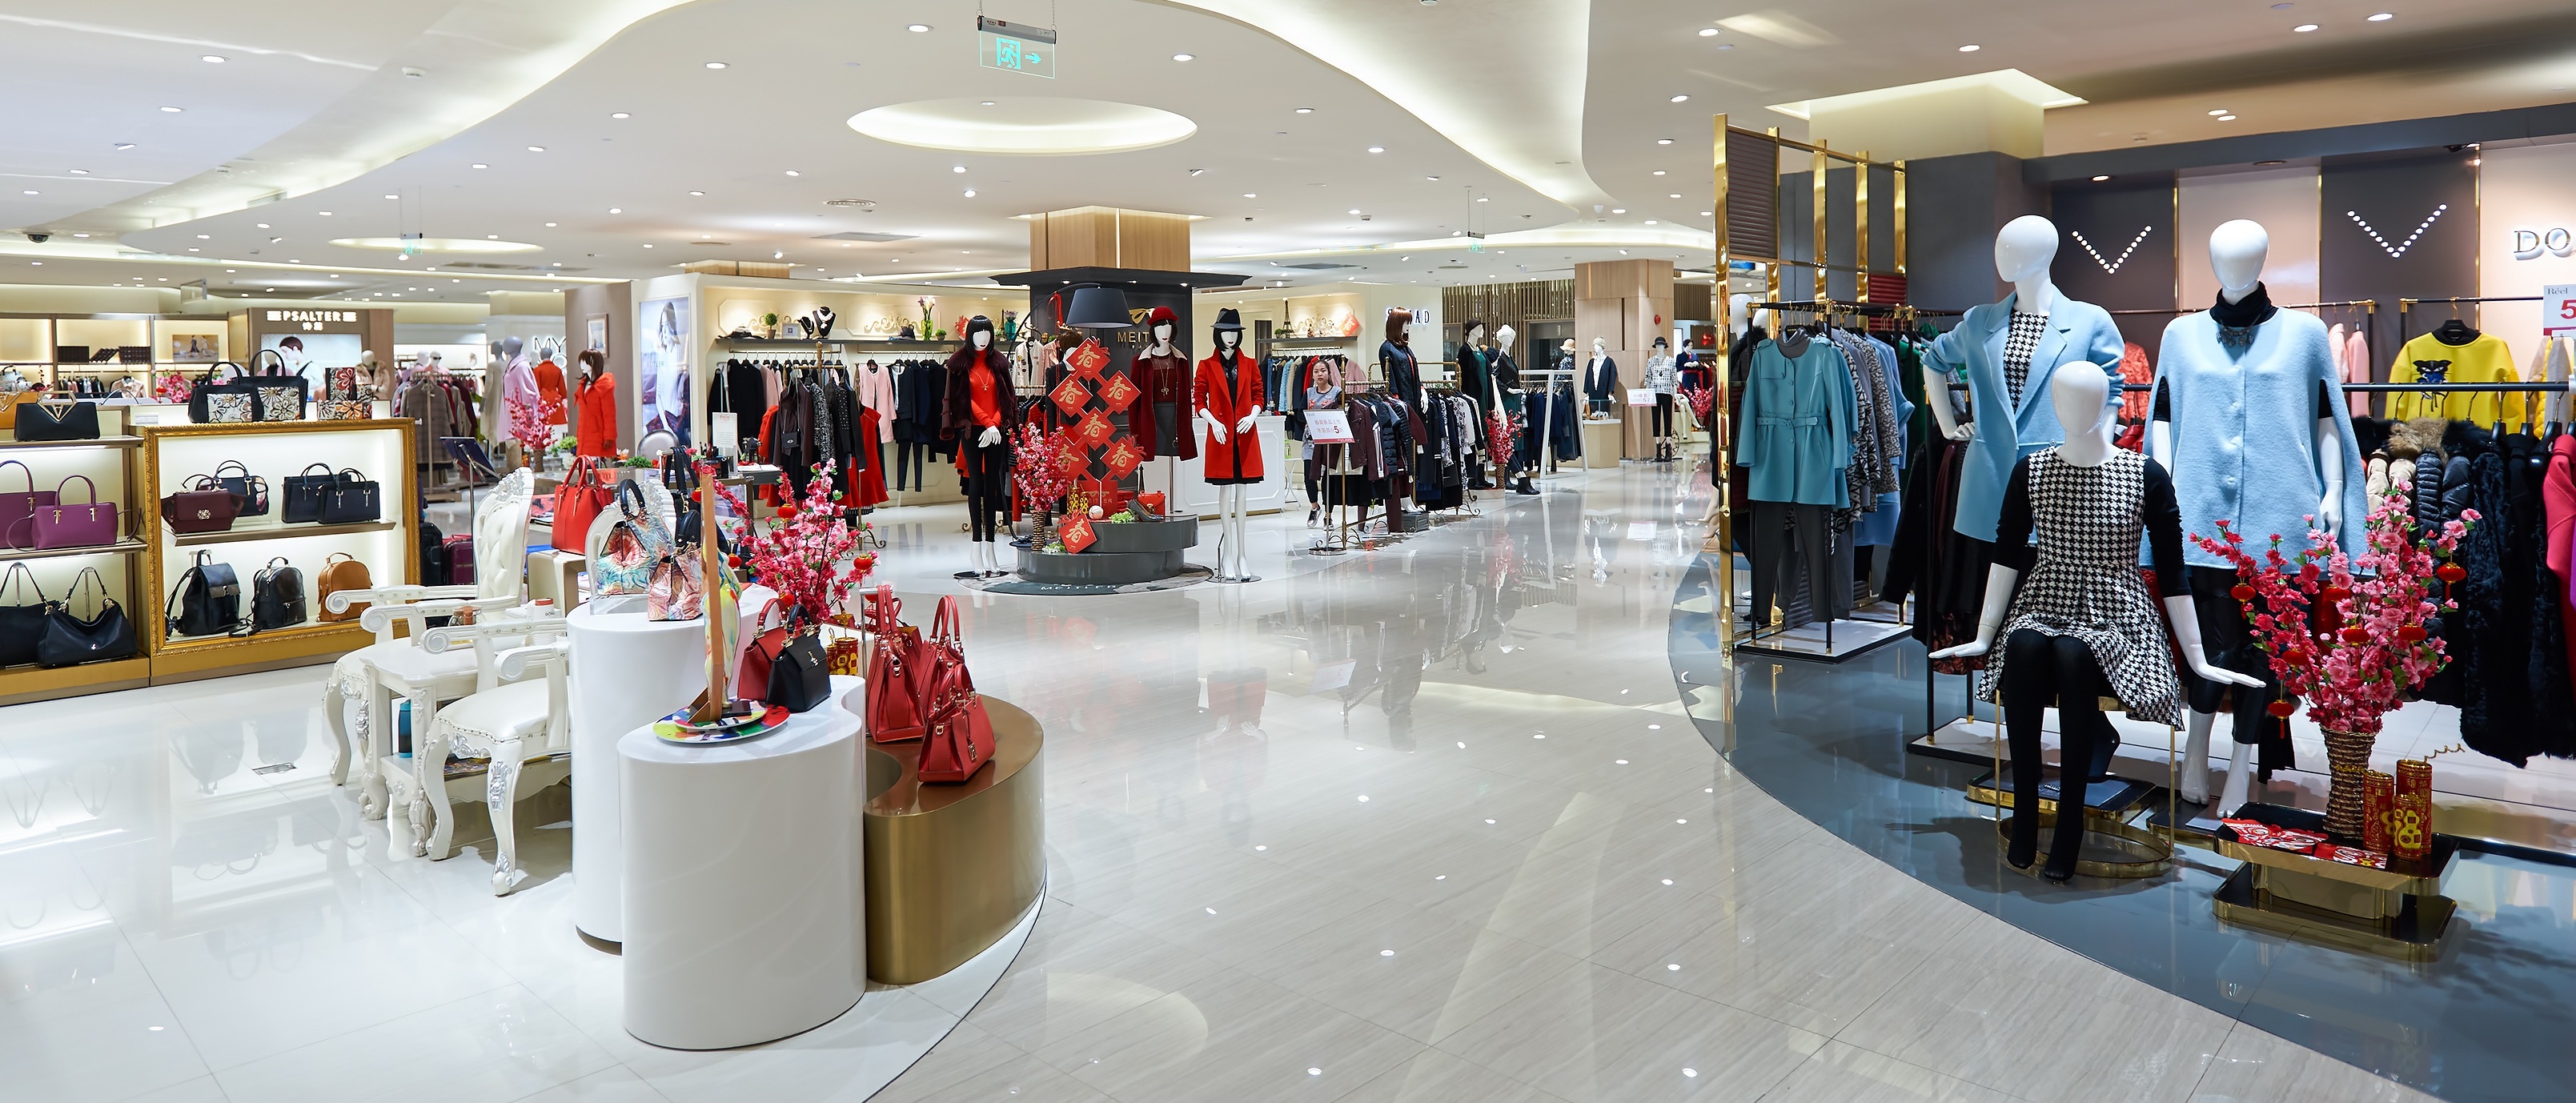 Leading Department Stores How They've Achieved Growth With an Online